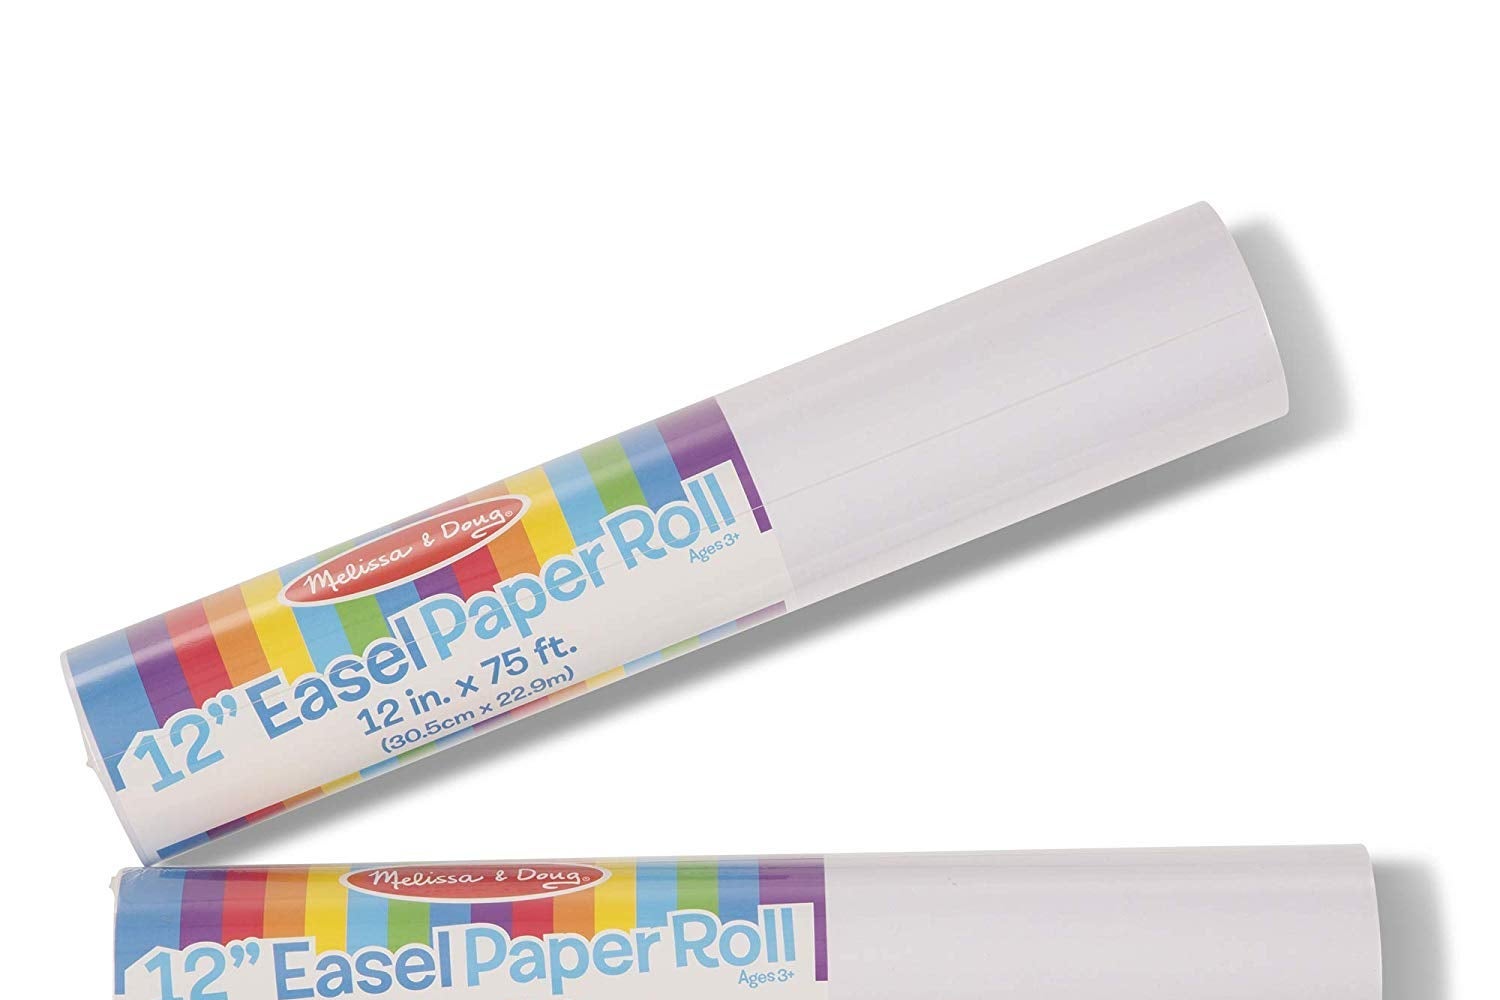 Rolls of easel paper